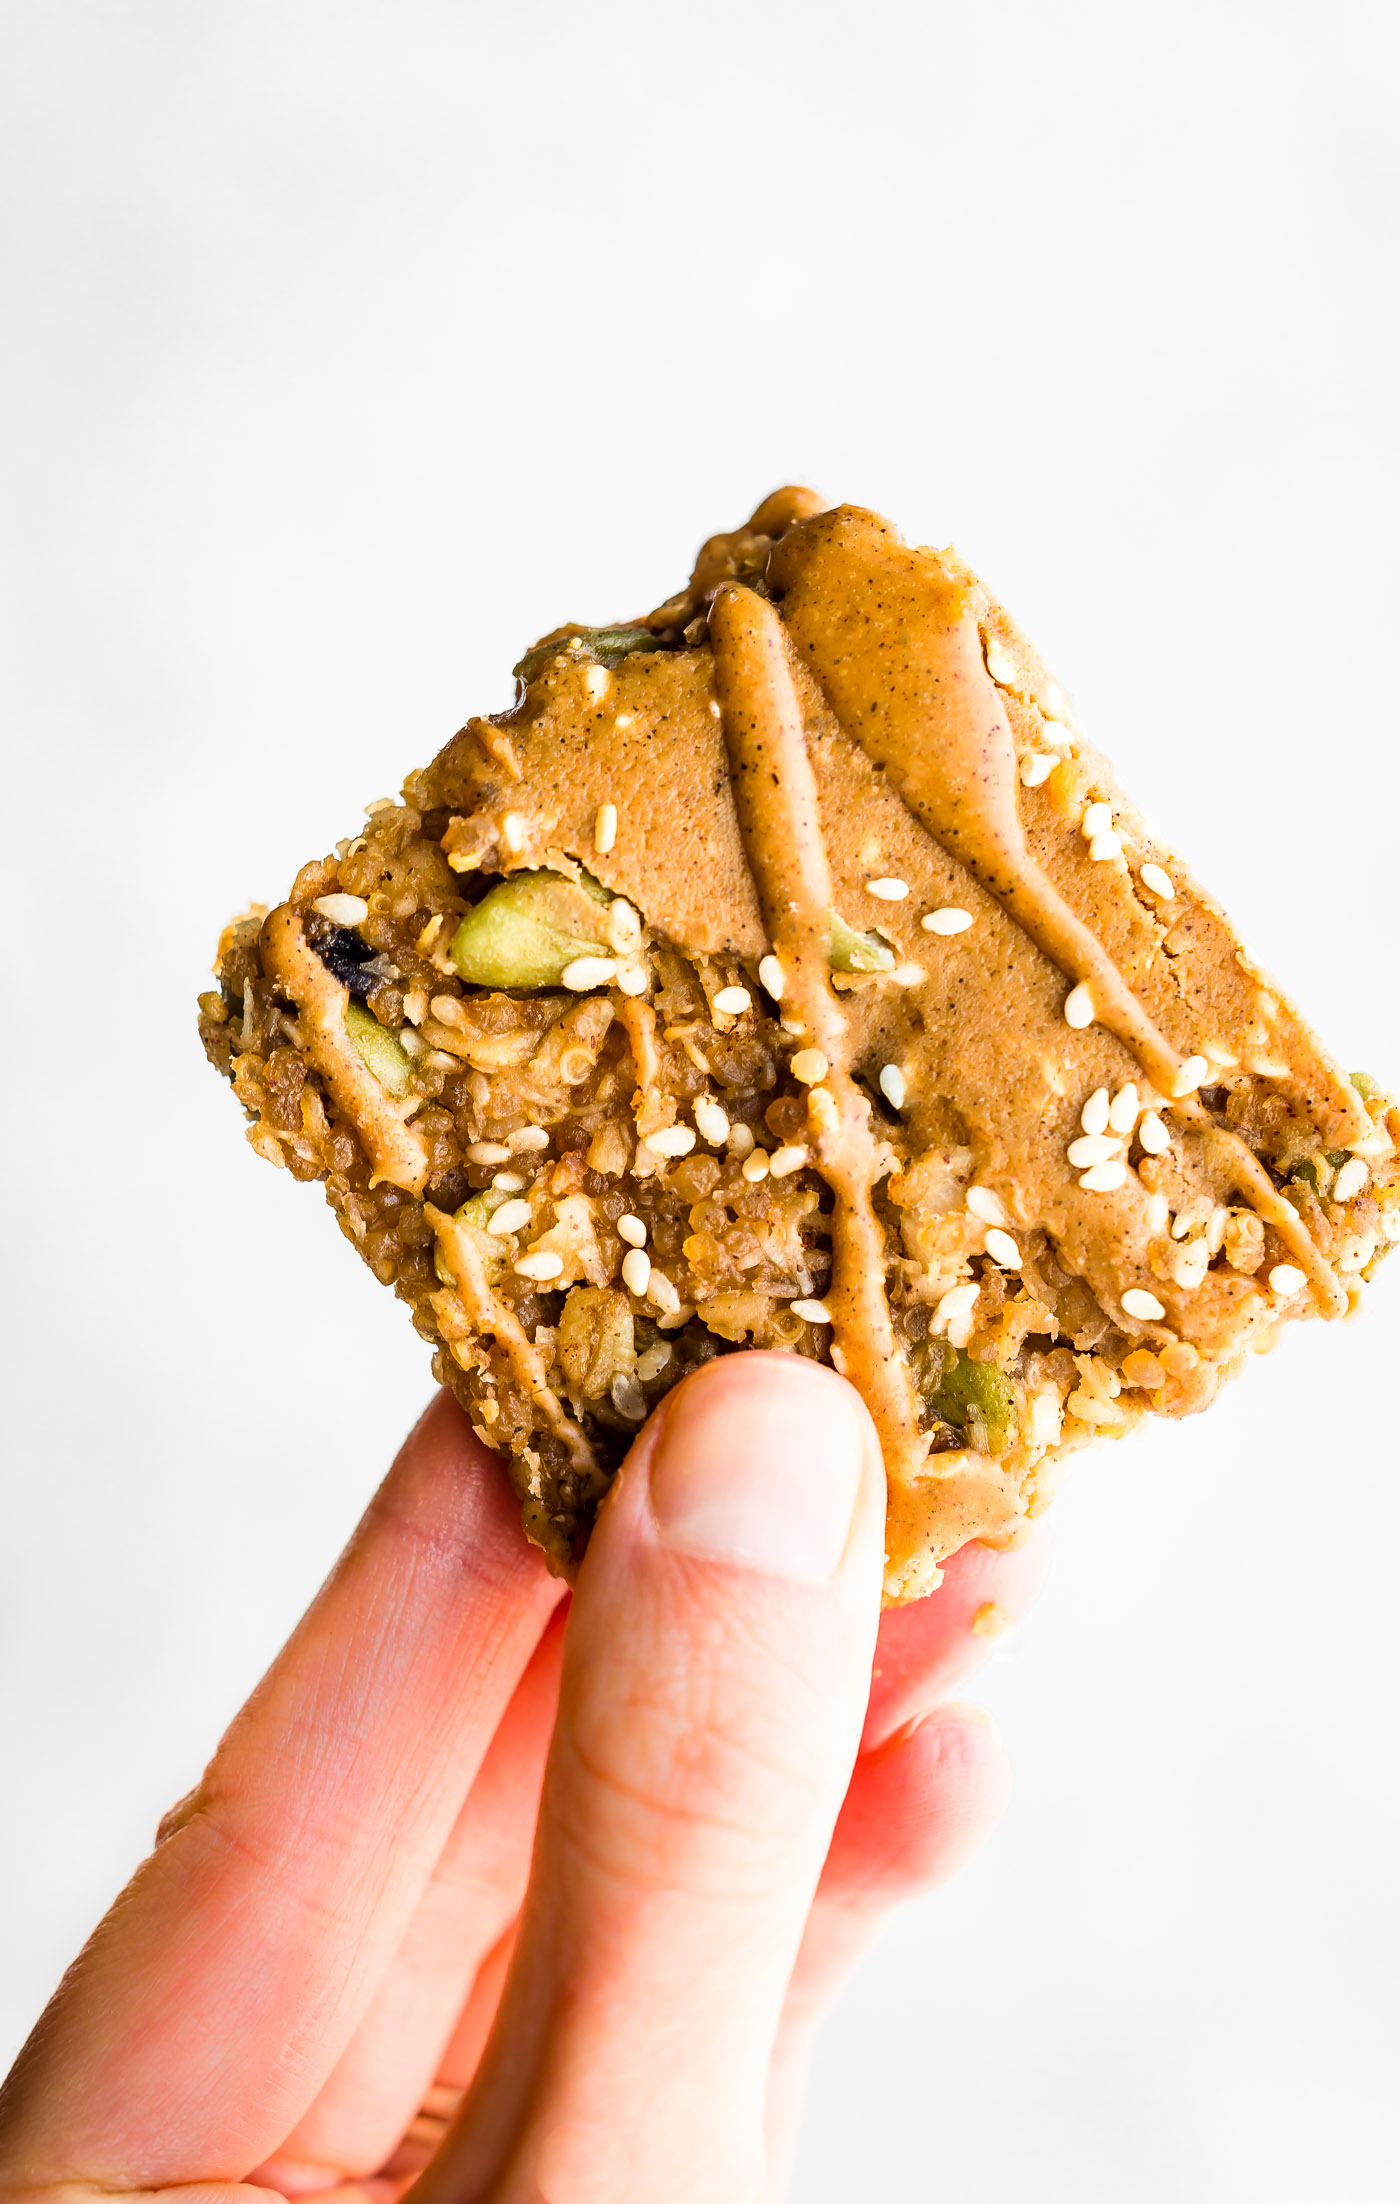 Maple Sesame Quinoa Bars are a delicious vegan breakfast or snack bar. Maple syrup, sesame, sunflower seed butter, & quinoa make for a sweet nutty flavor.